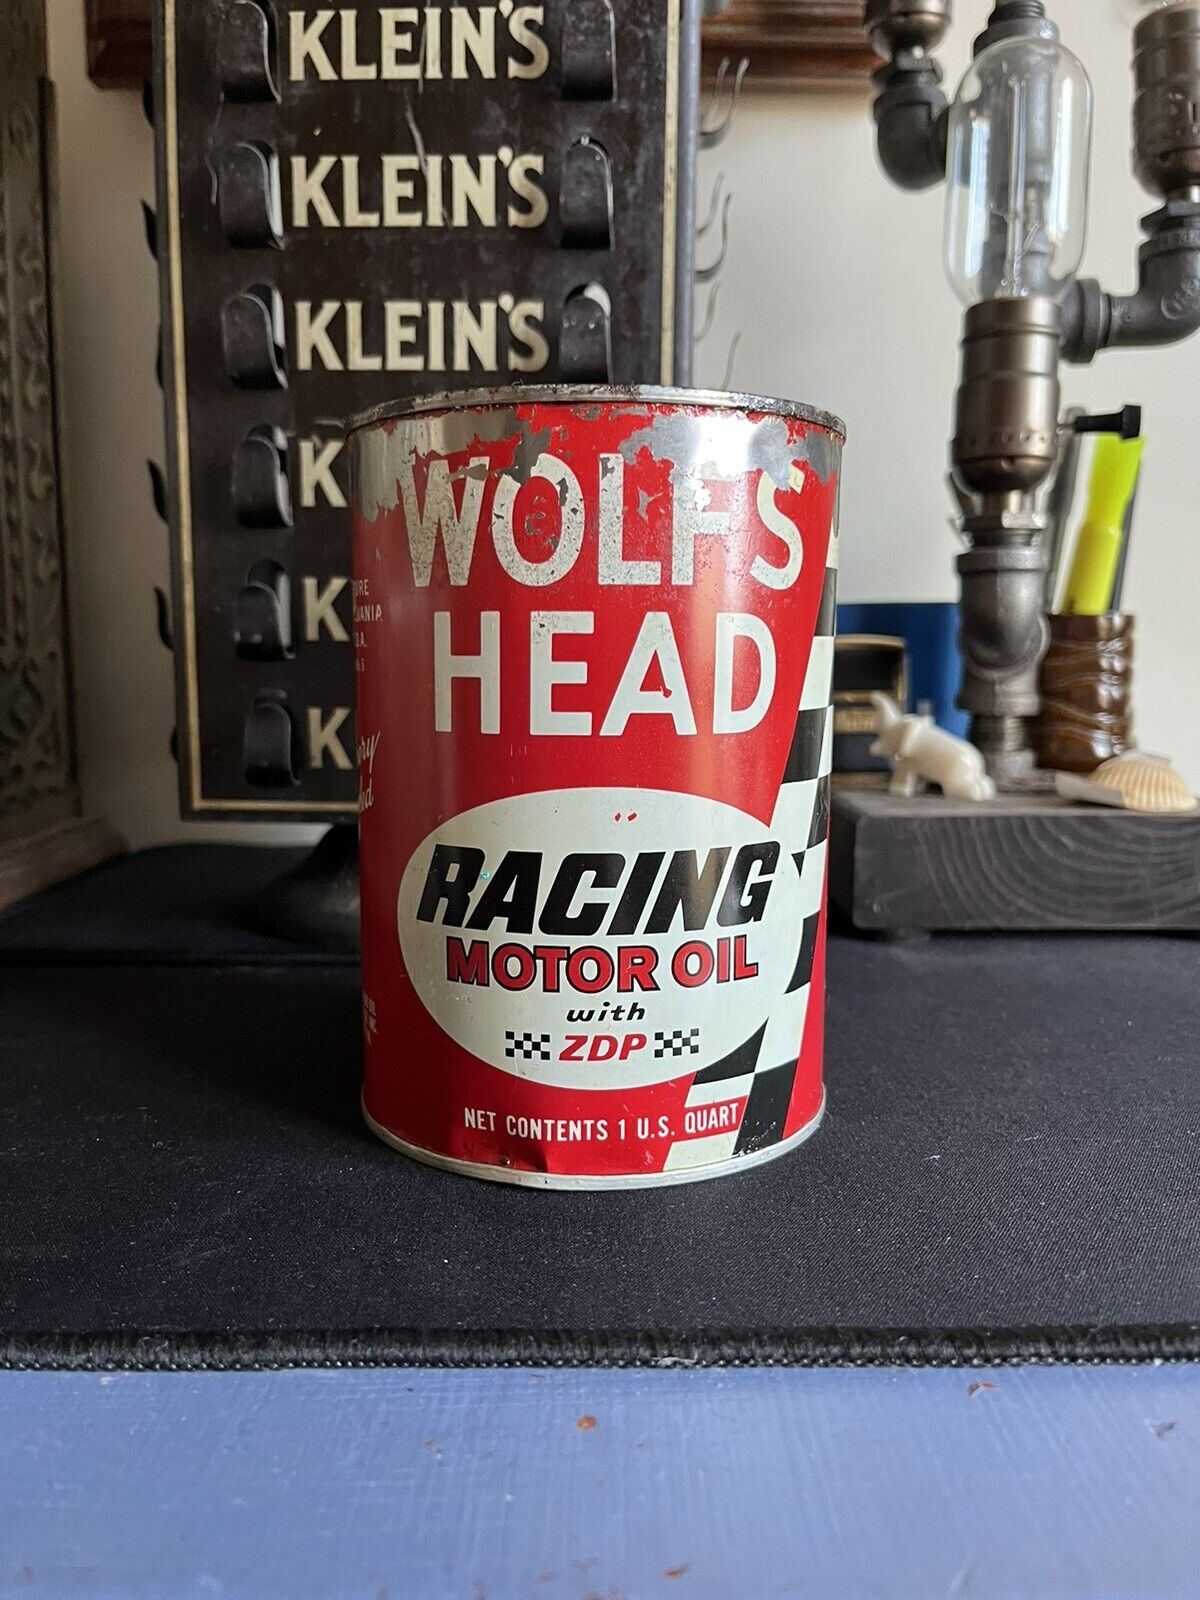 1960’s WOLF\'S HEAD RACING Motor Oil Can 1 qt. - Gas & Oil -FULL-